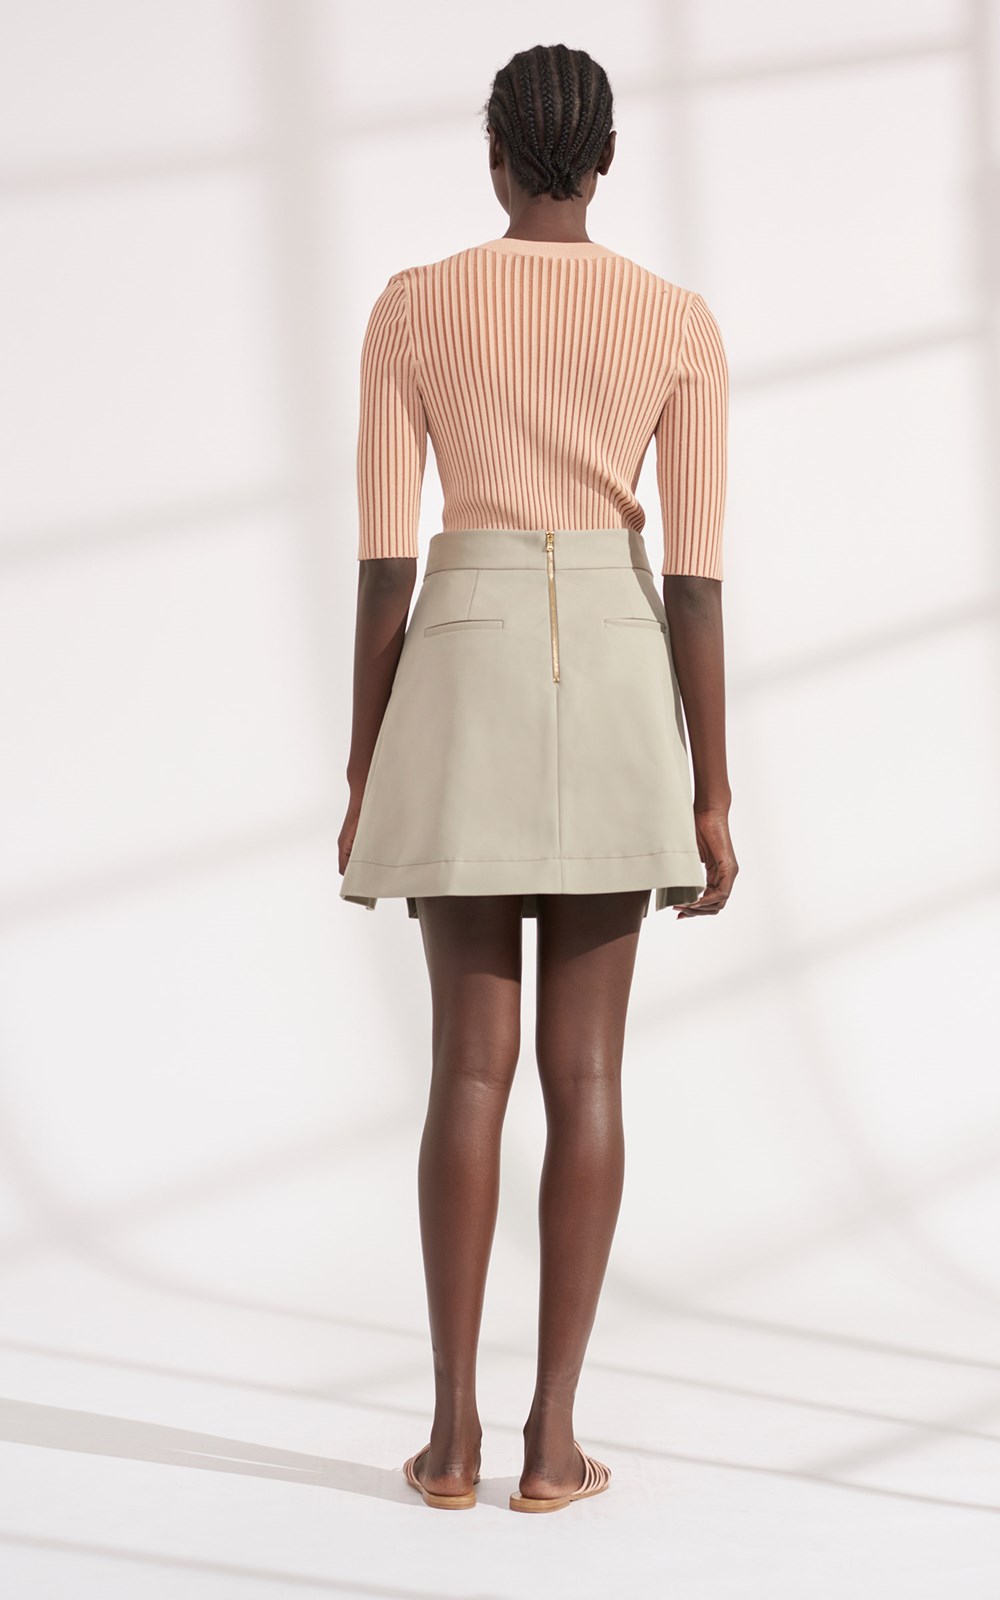 BINARY TRENCH SKIRT by Dion Lee